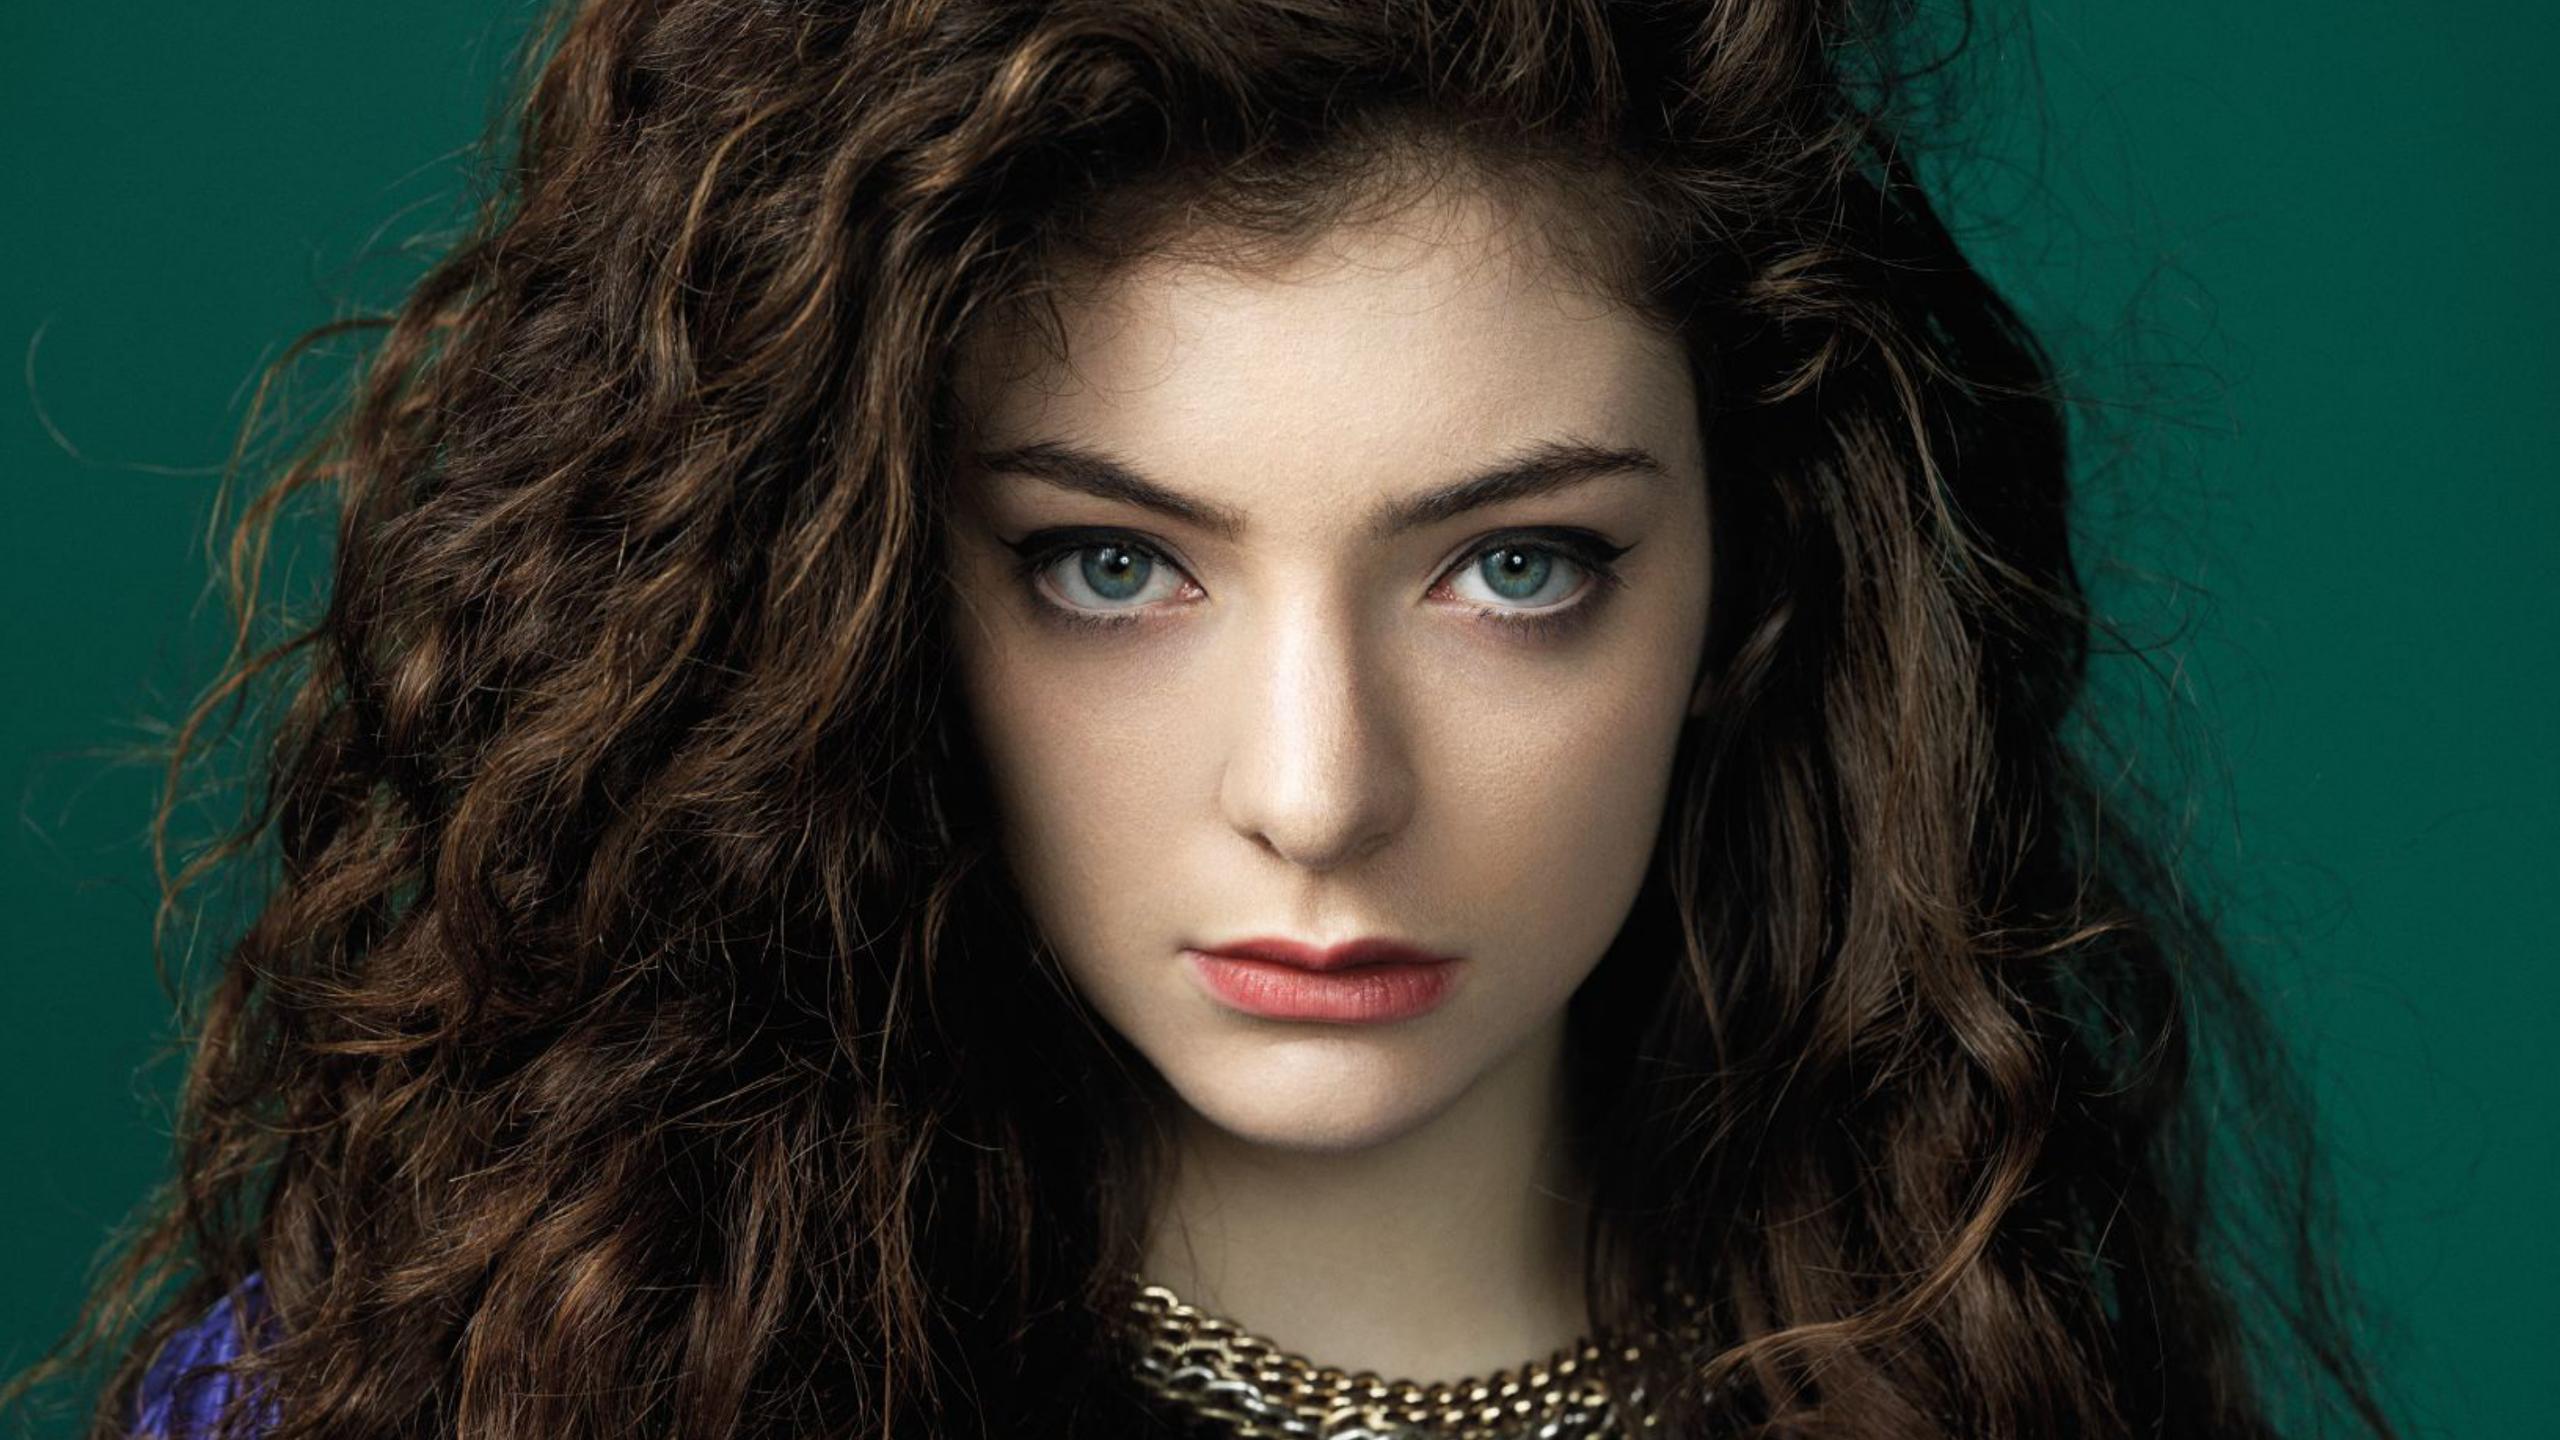 Lorde Face Wallpaper Background 54126 2560x1440px